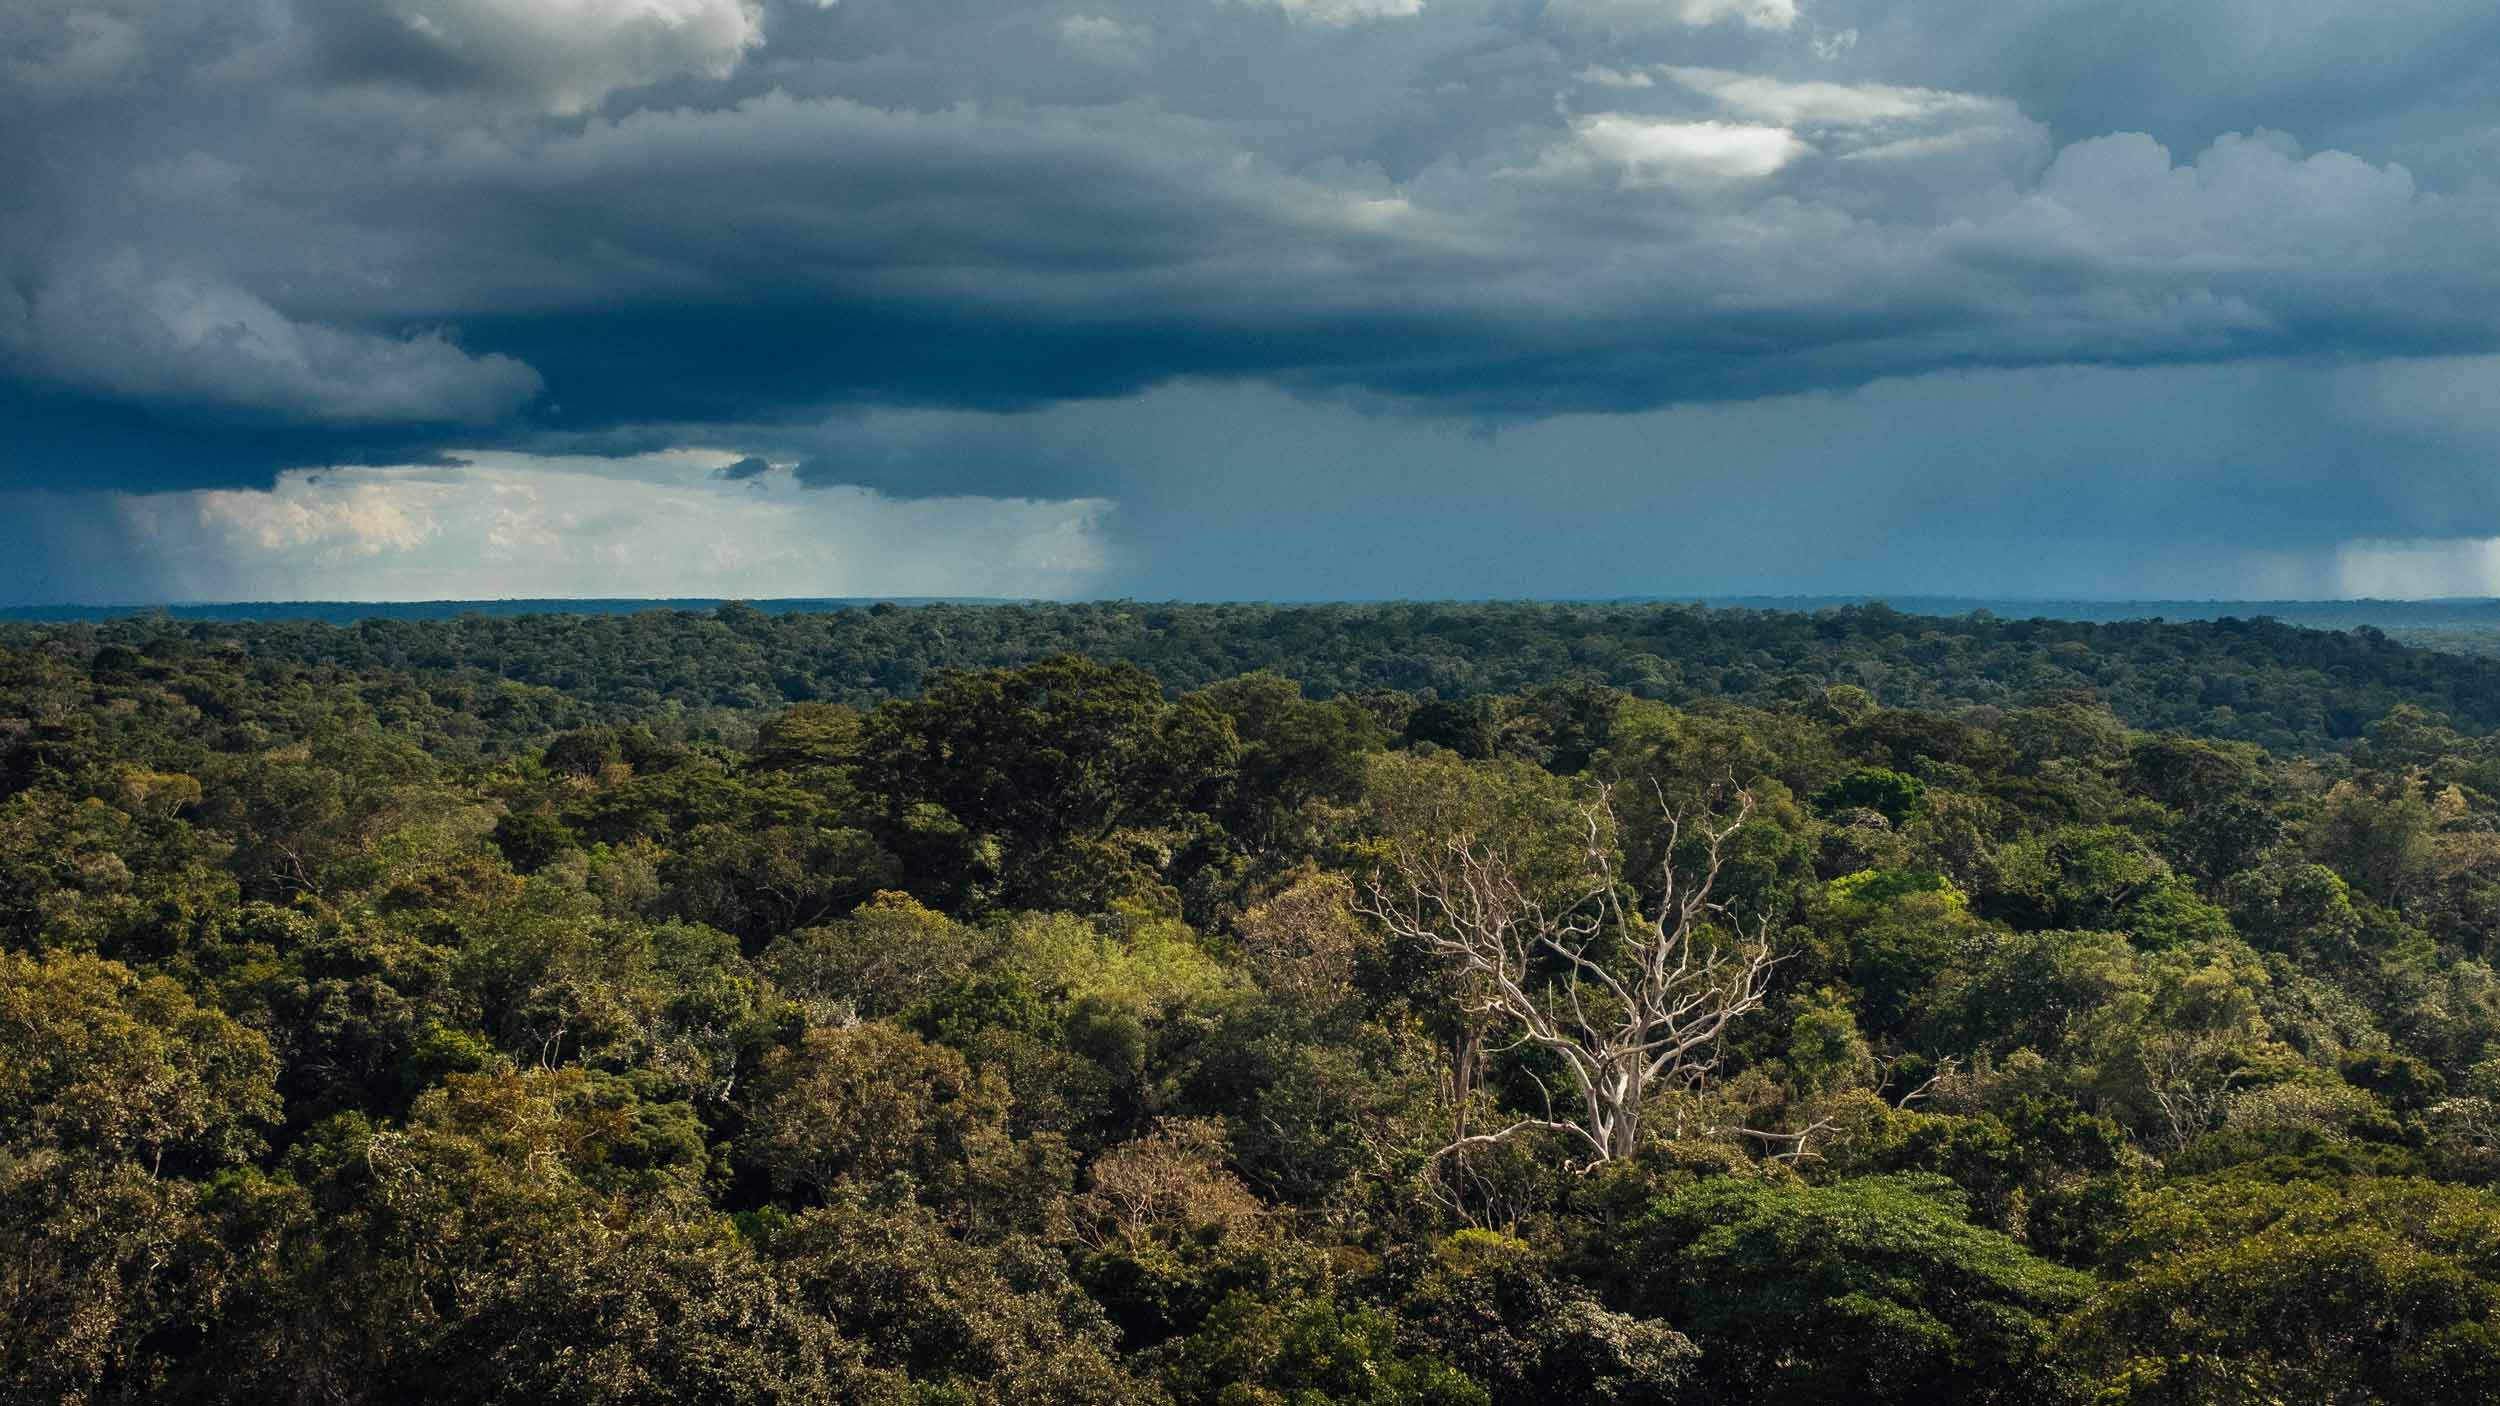 Brazil holds one-third of the world’s remaining tropical rainforest and until recently it absorbed as much CO2 pollution every year as the amount produced by all the cars on the planet. Now scientists fear that deforestation and climate change are pushing the forest to a tipping point beyond which it will actually release more CO2 into the atmosphere than it captures. Image by Sam Eaton. Brazil, 2018.